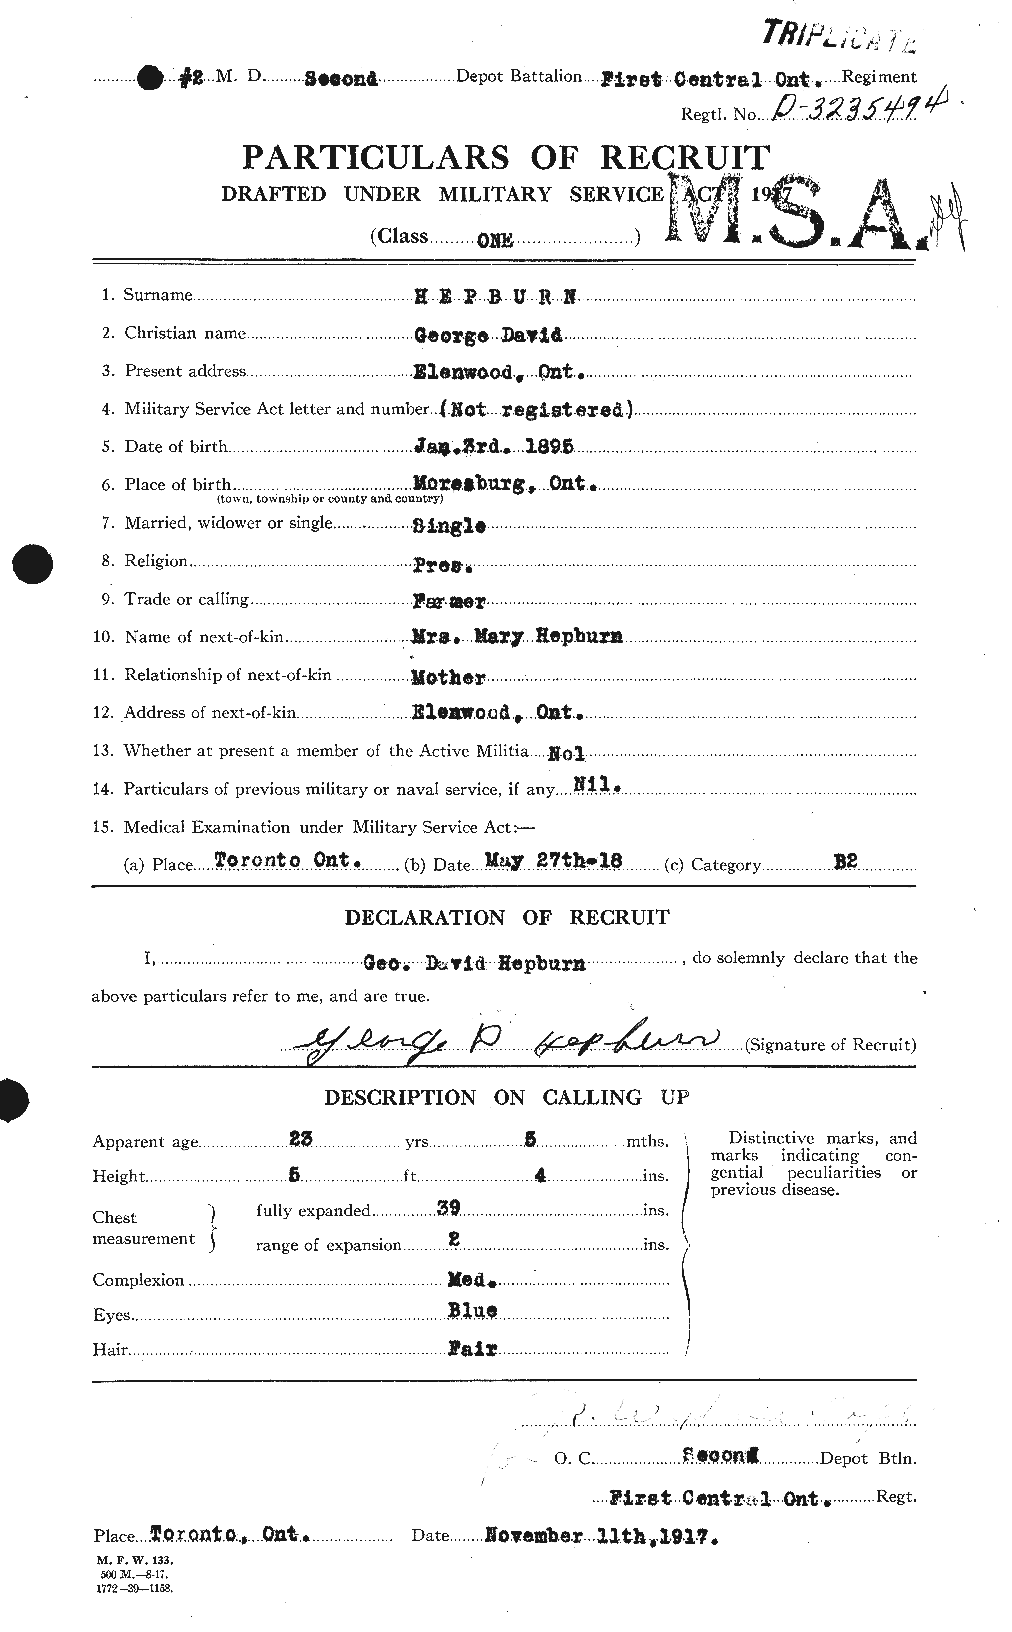 Personnel Records of the First World War - CEF 389784a